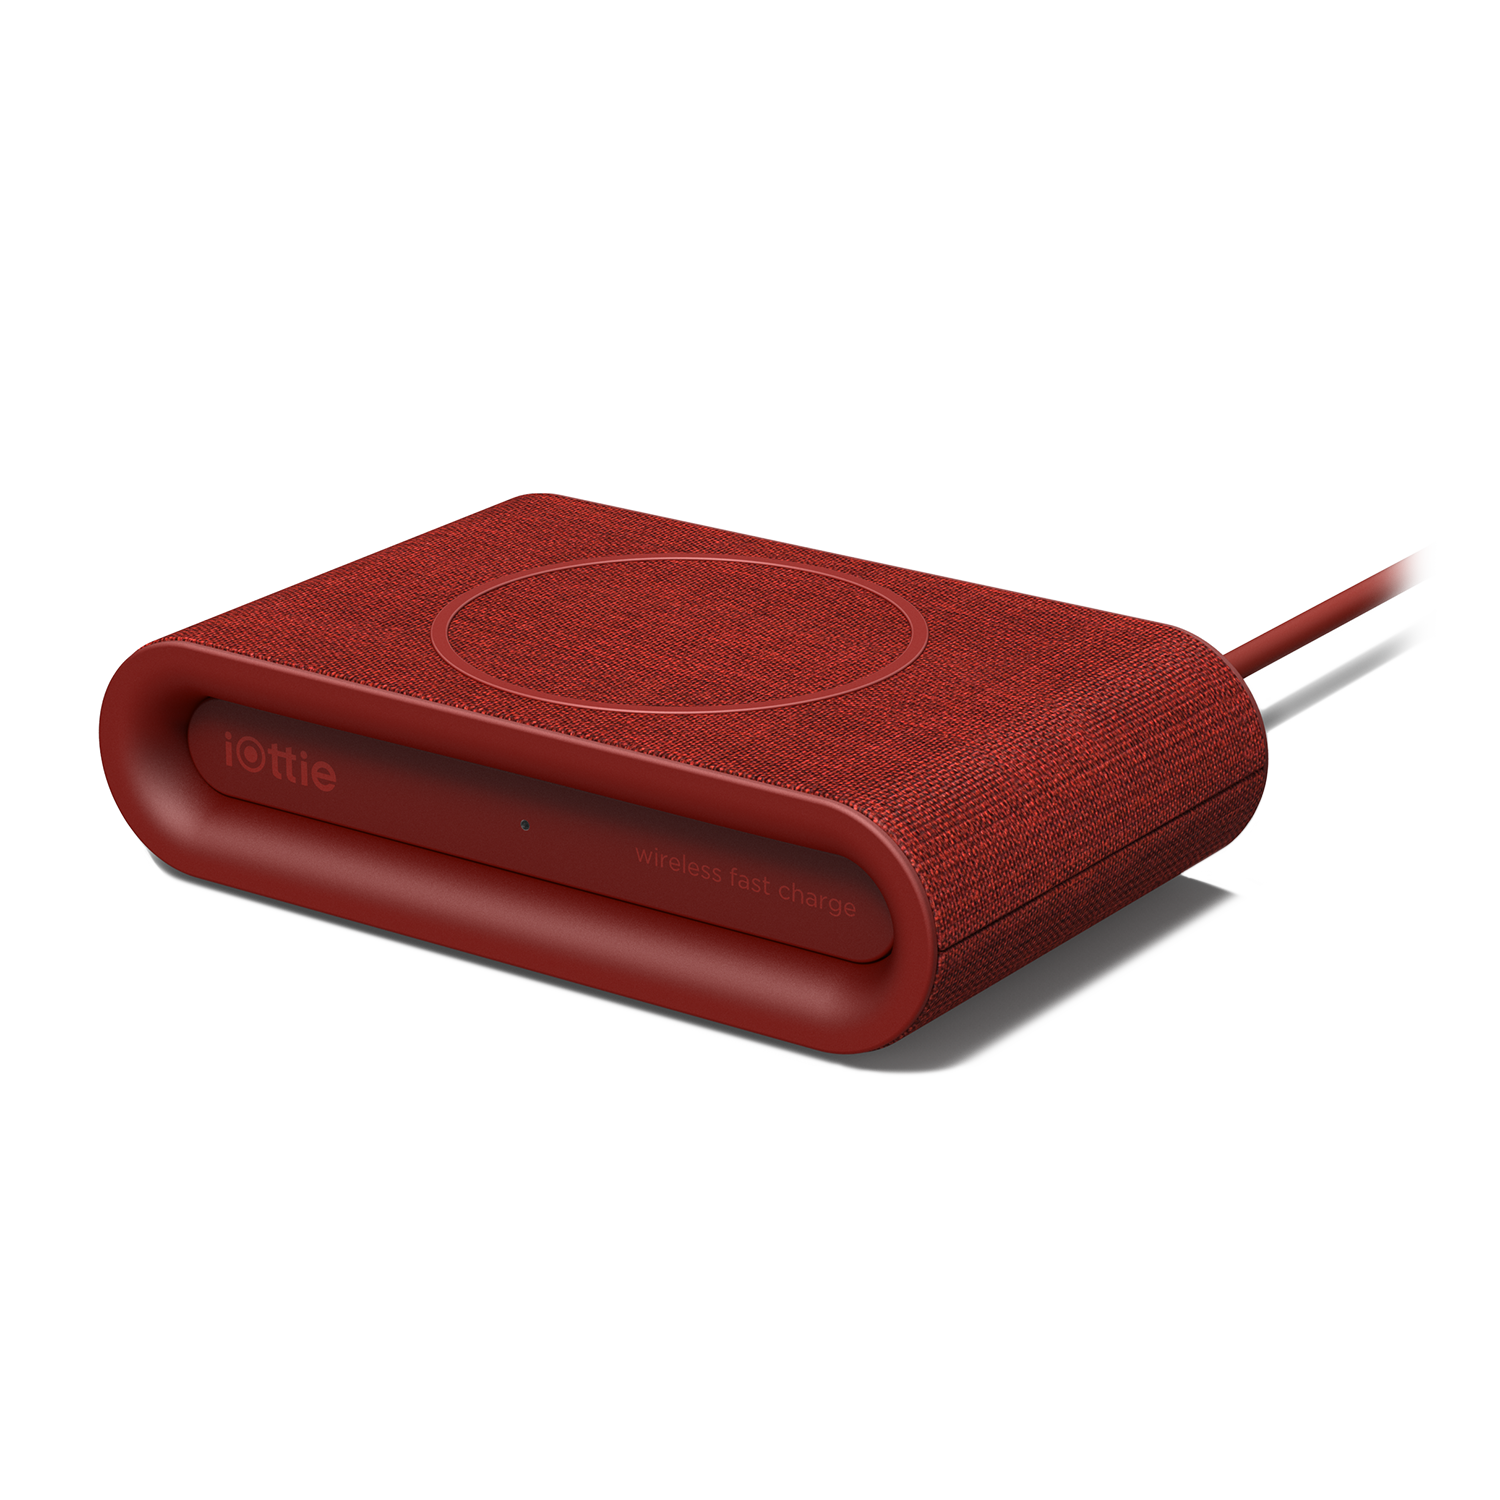 iON Wireless Plus Charging Pad in Ruby